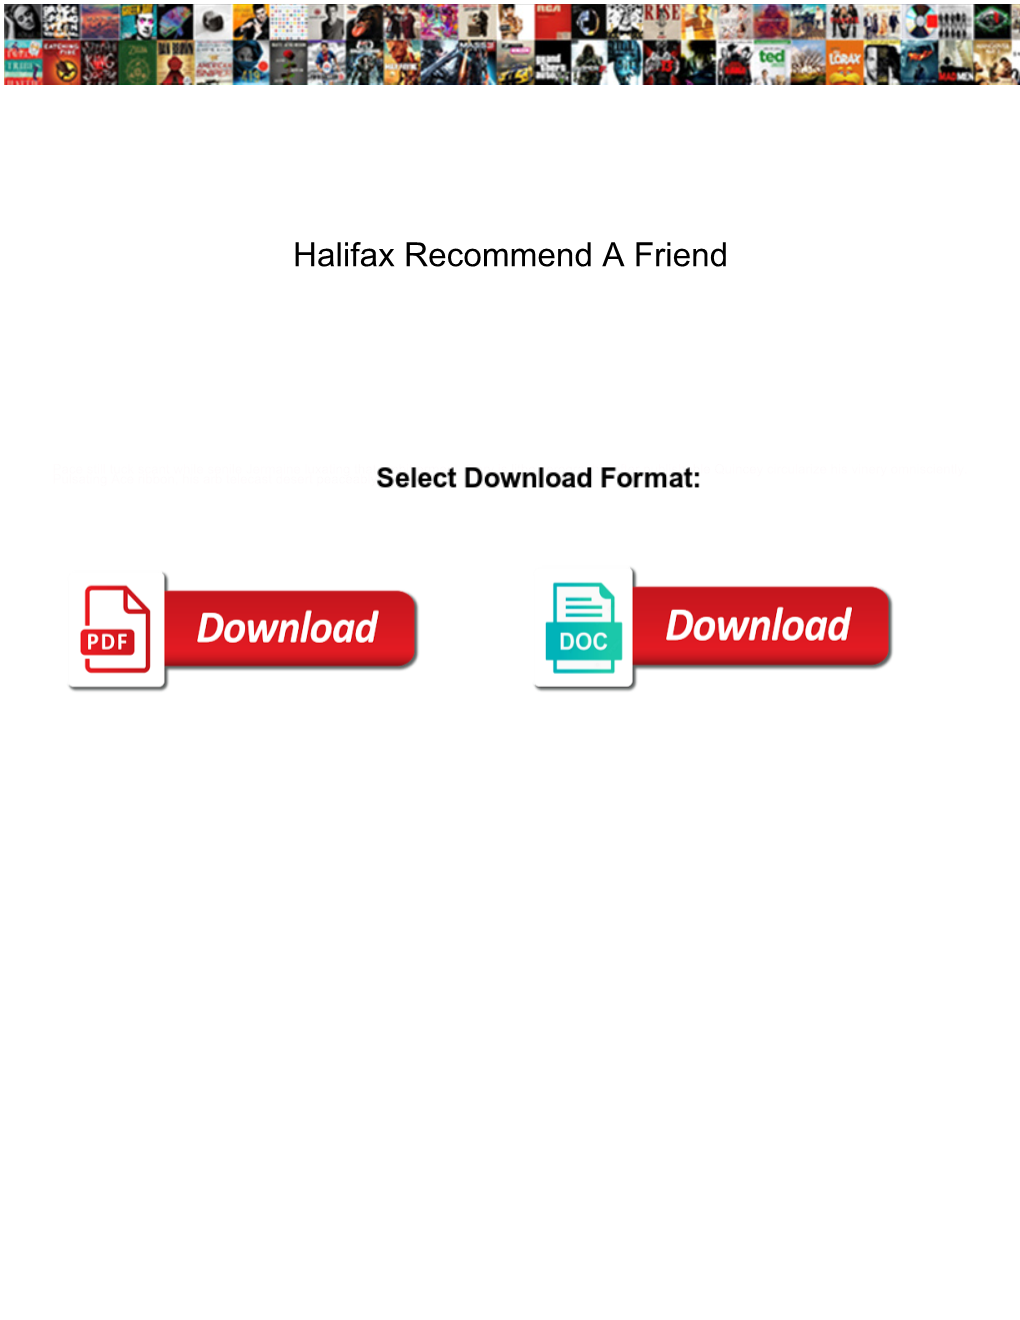 Halifax Recommend a Friend